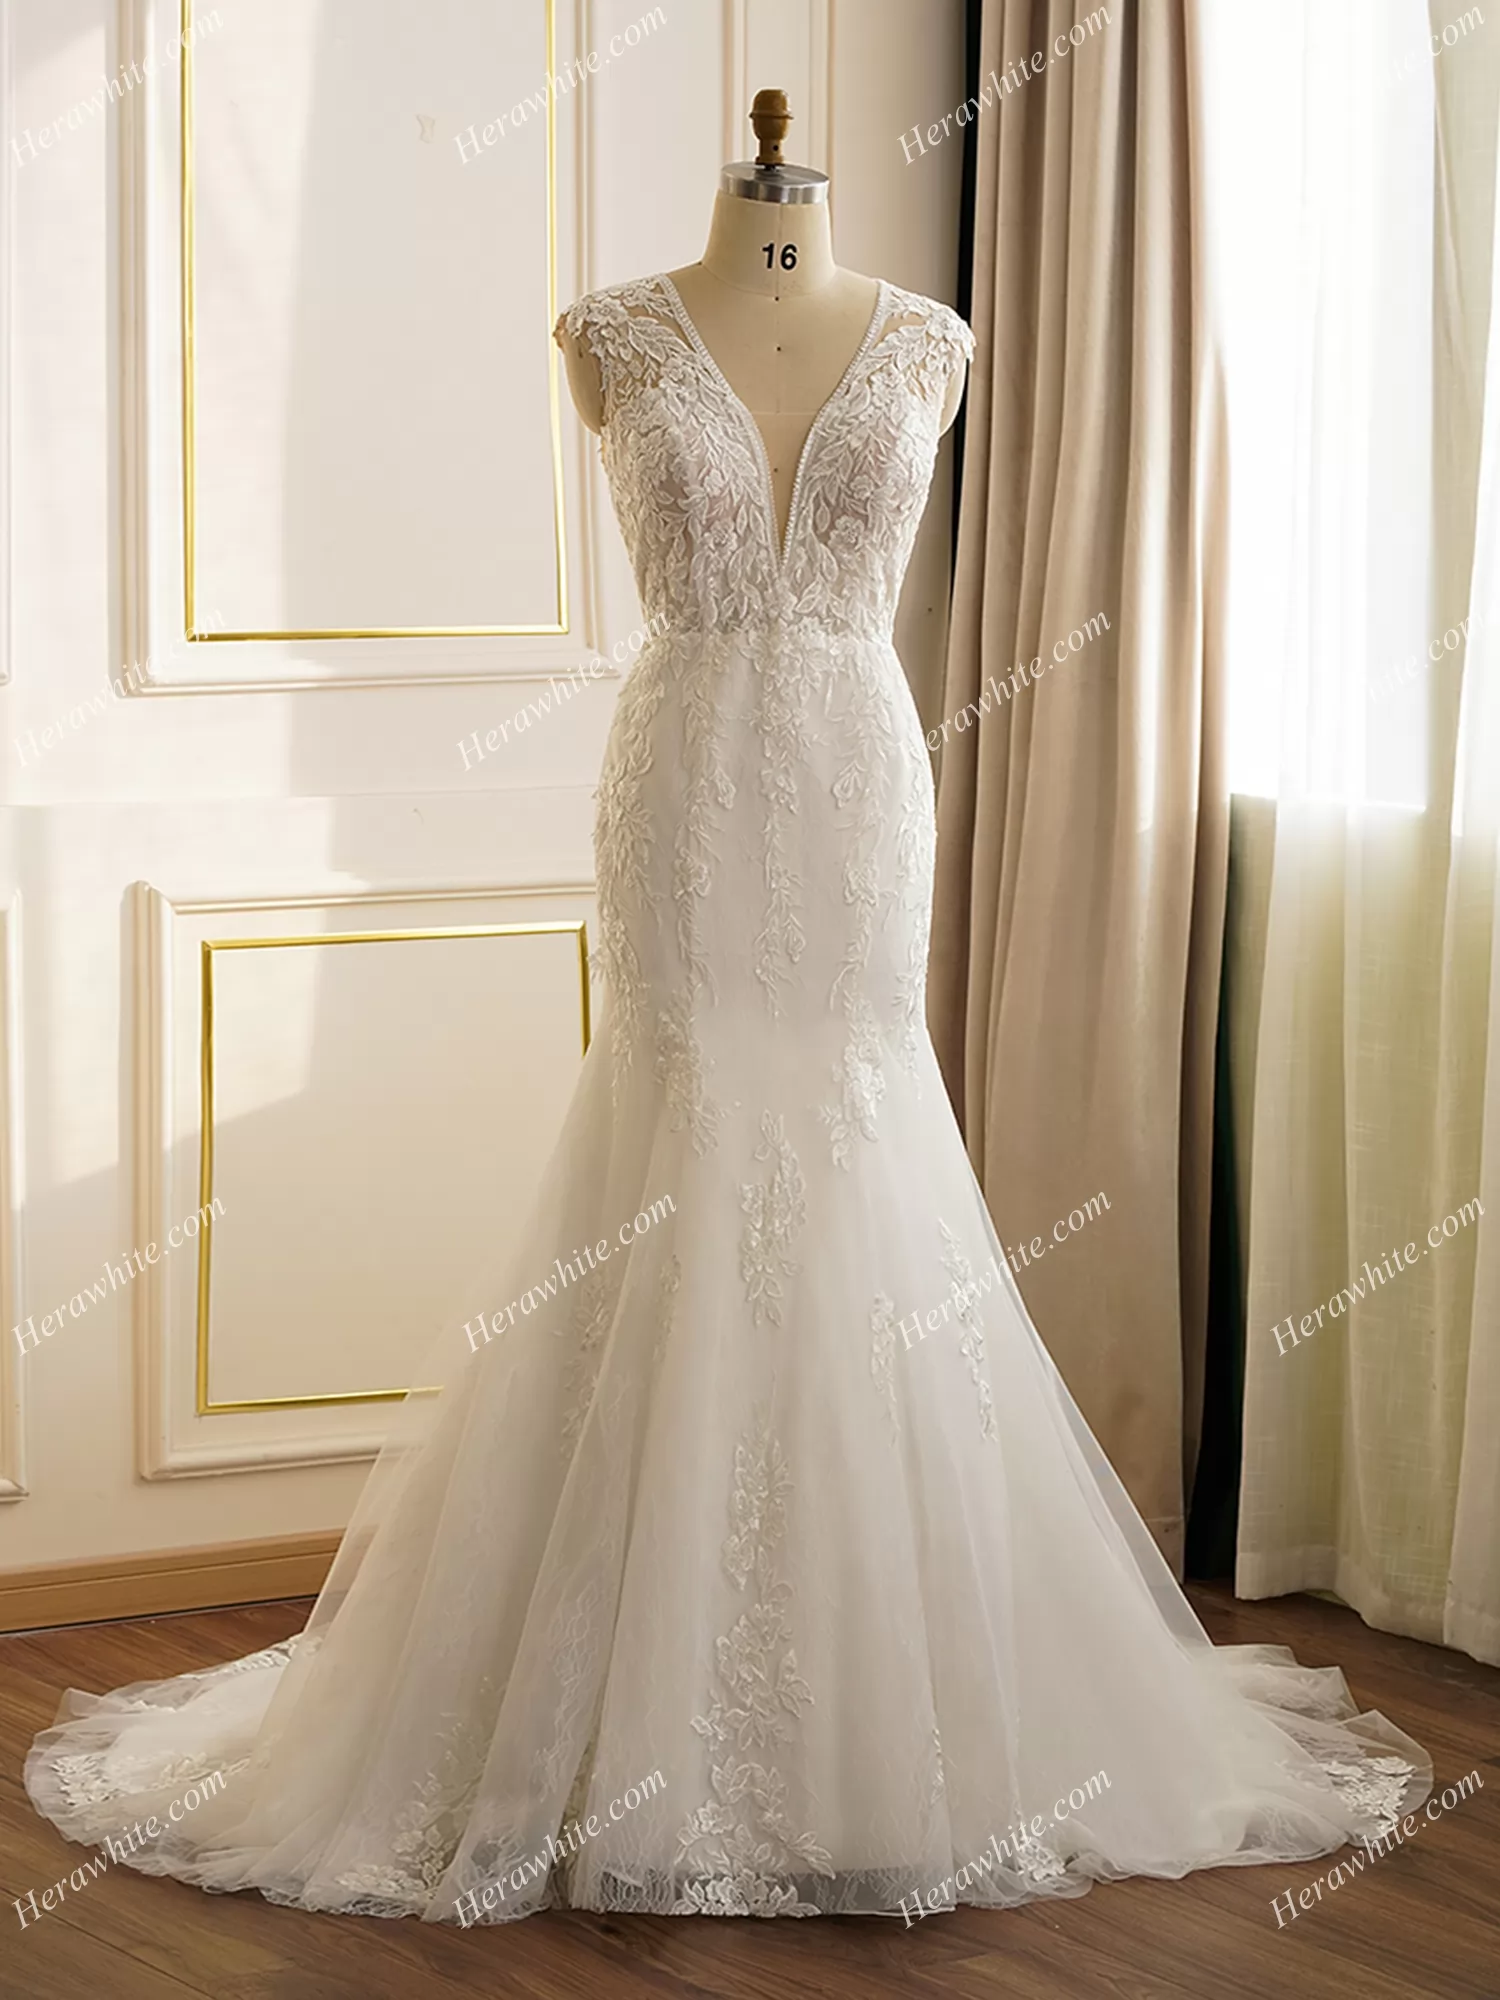 Fit and Flare &Trumpet Plunging Neckline Wedding Dress